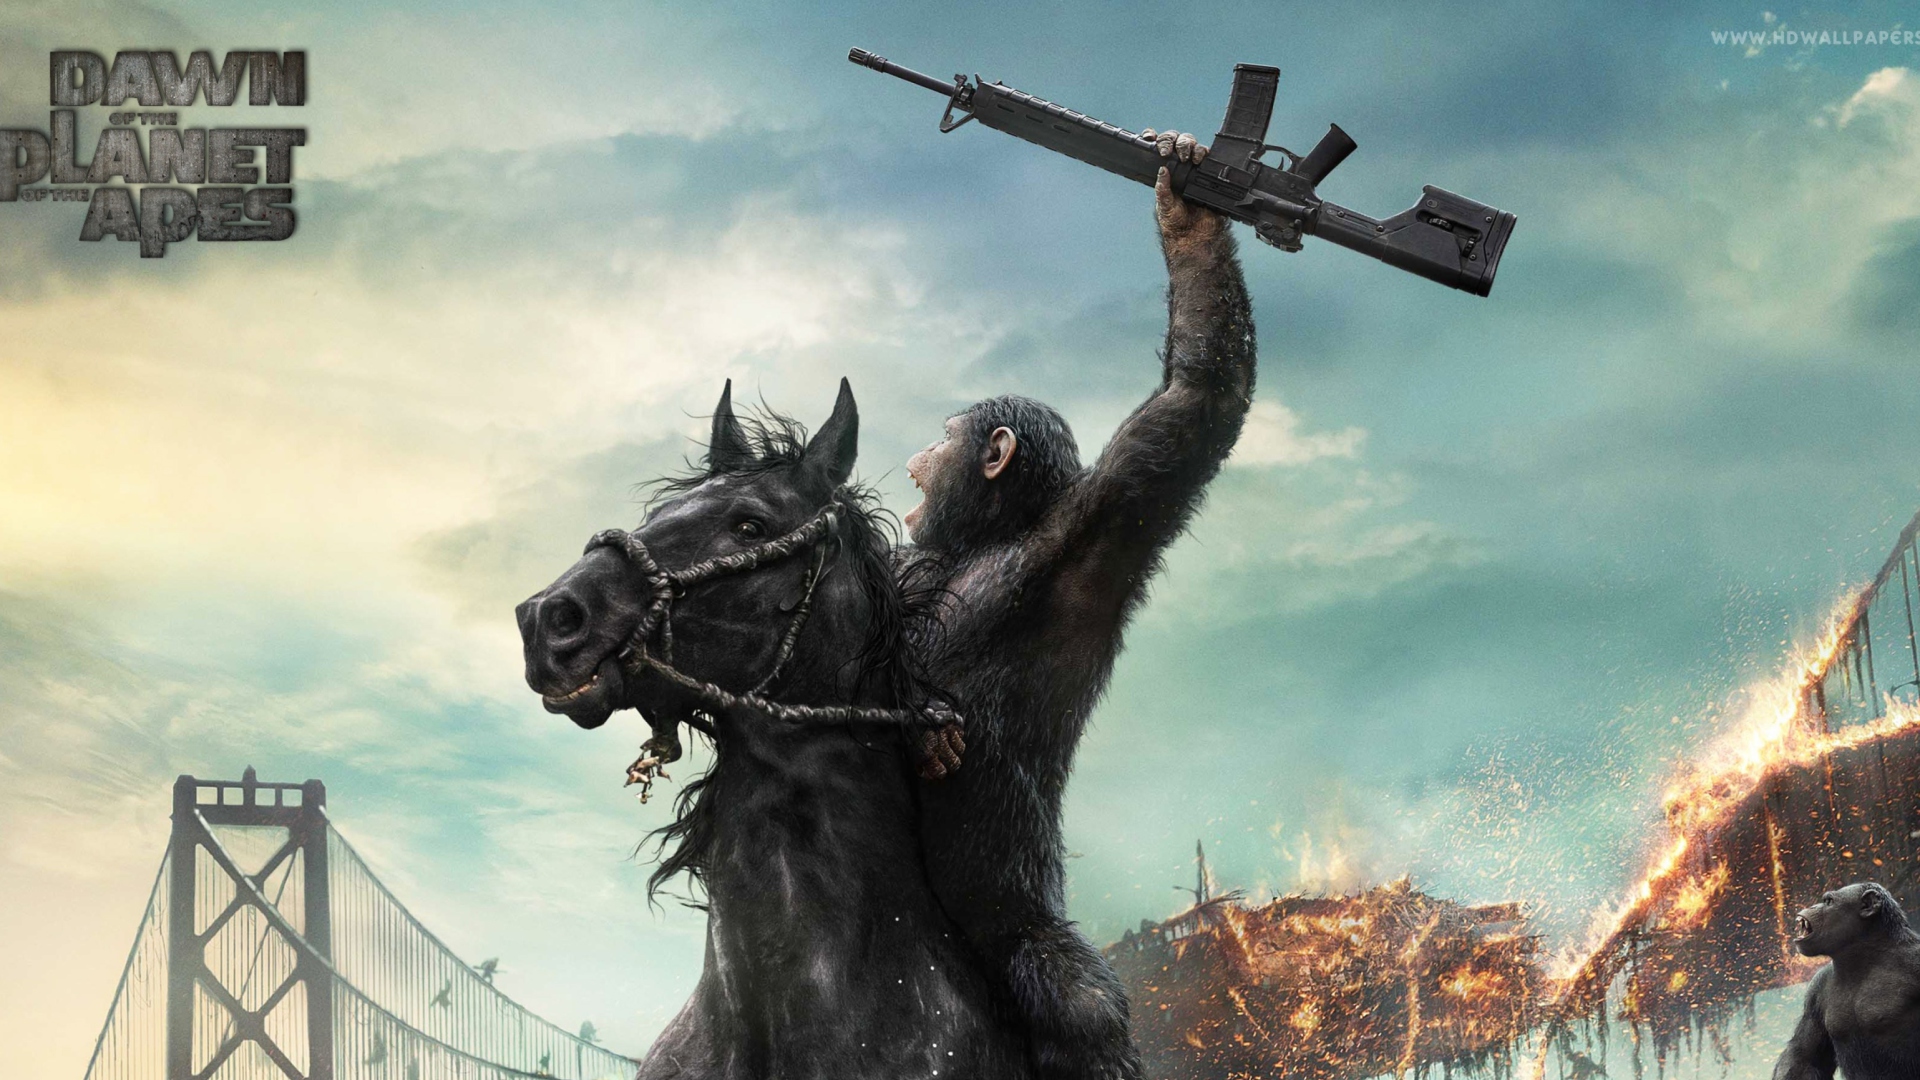 Das Dawn Of The Planet Of The Apes Movie Wallpaper 1920x1080